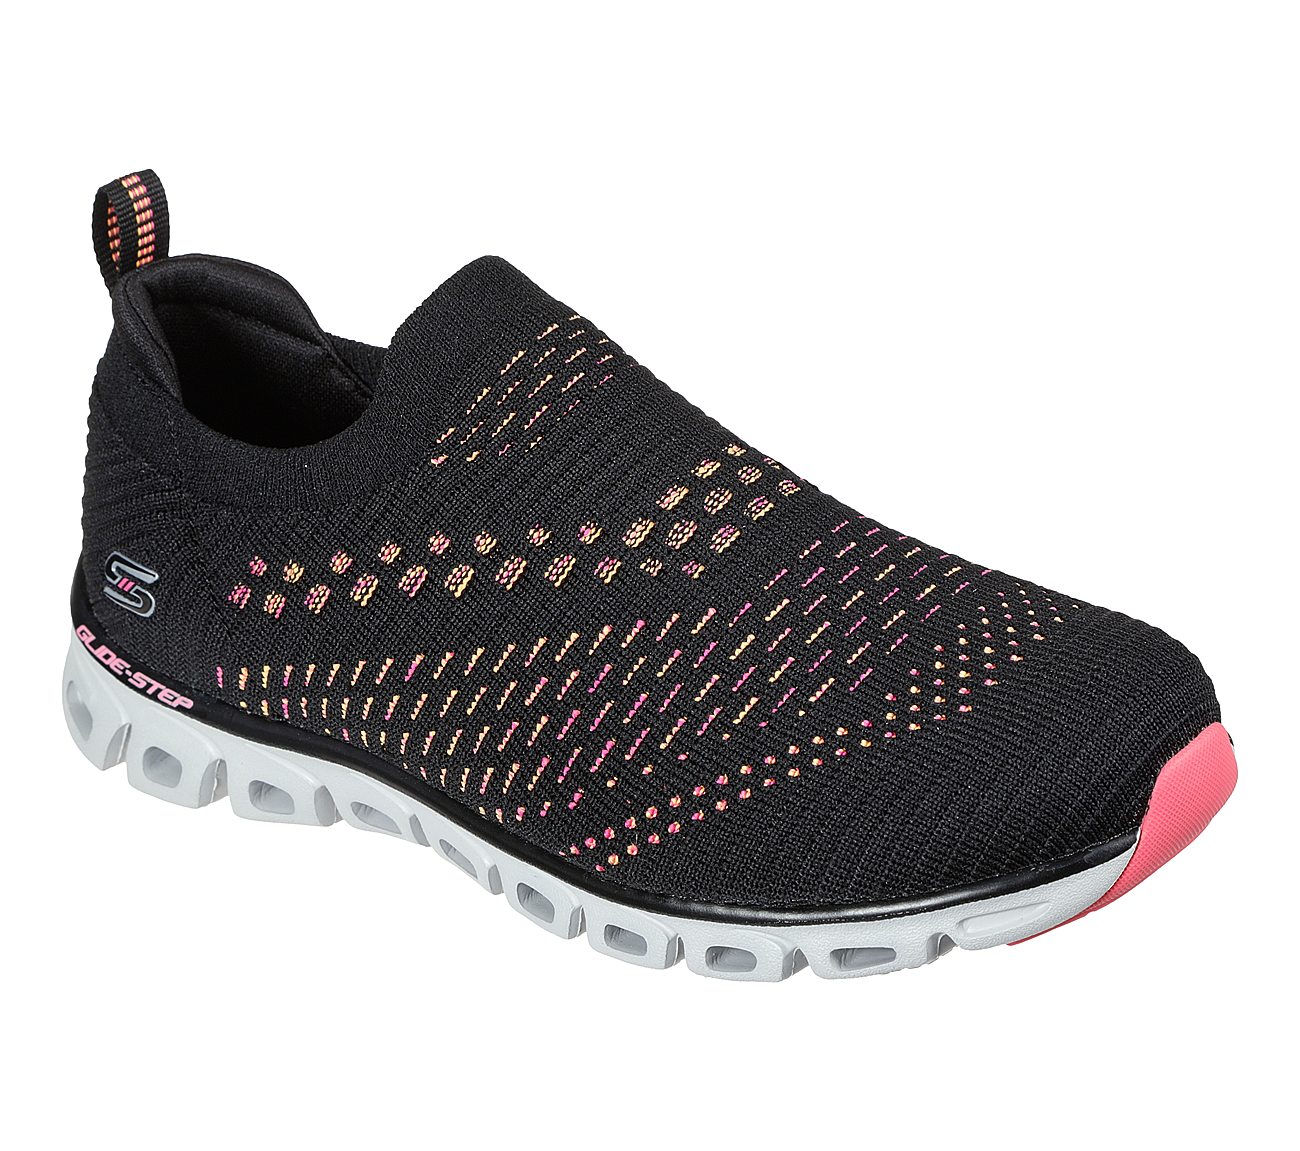 GLIDE-STEP - OH SO SOFT, BLACK/HOT PINK Footwear Lateral View